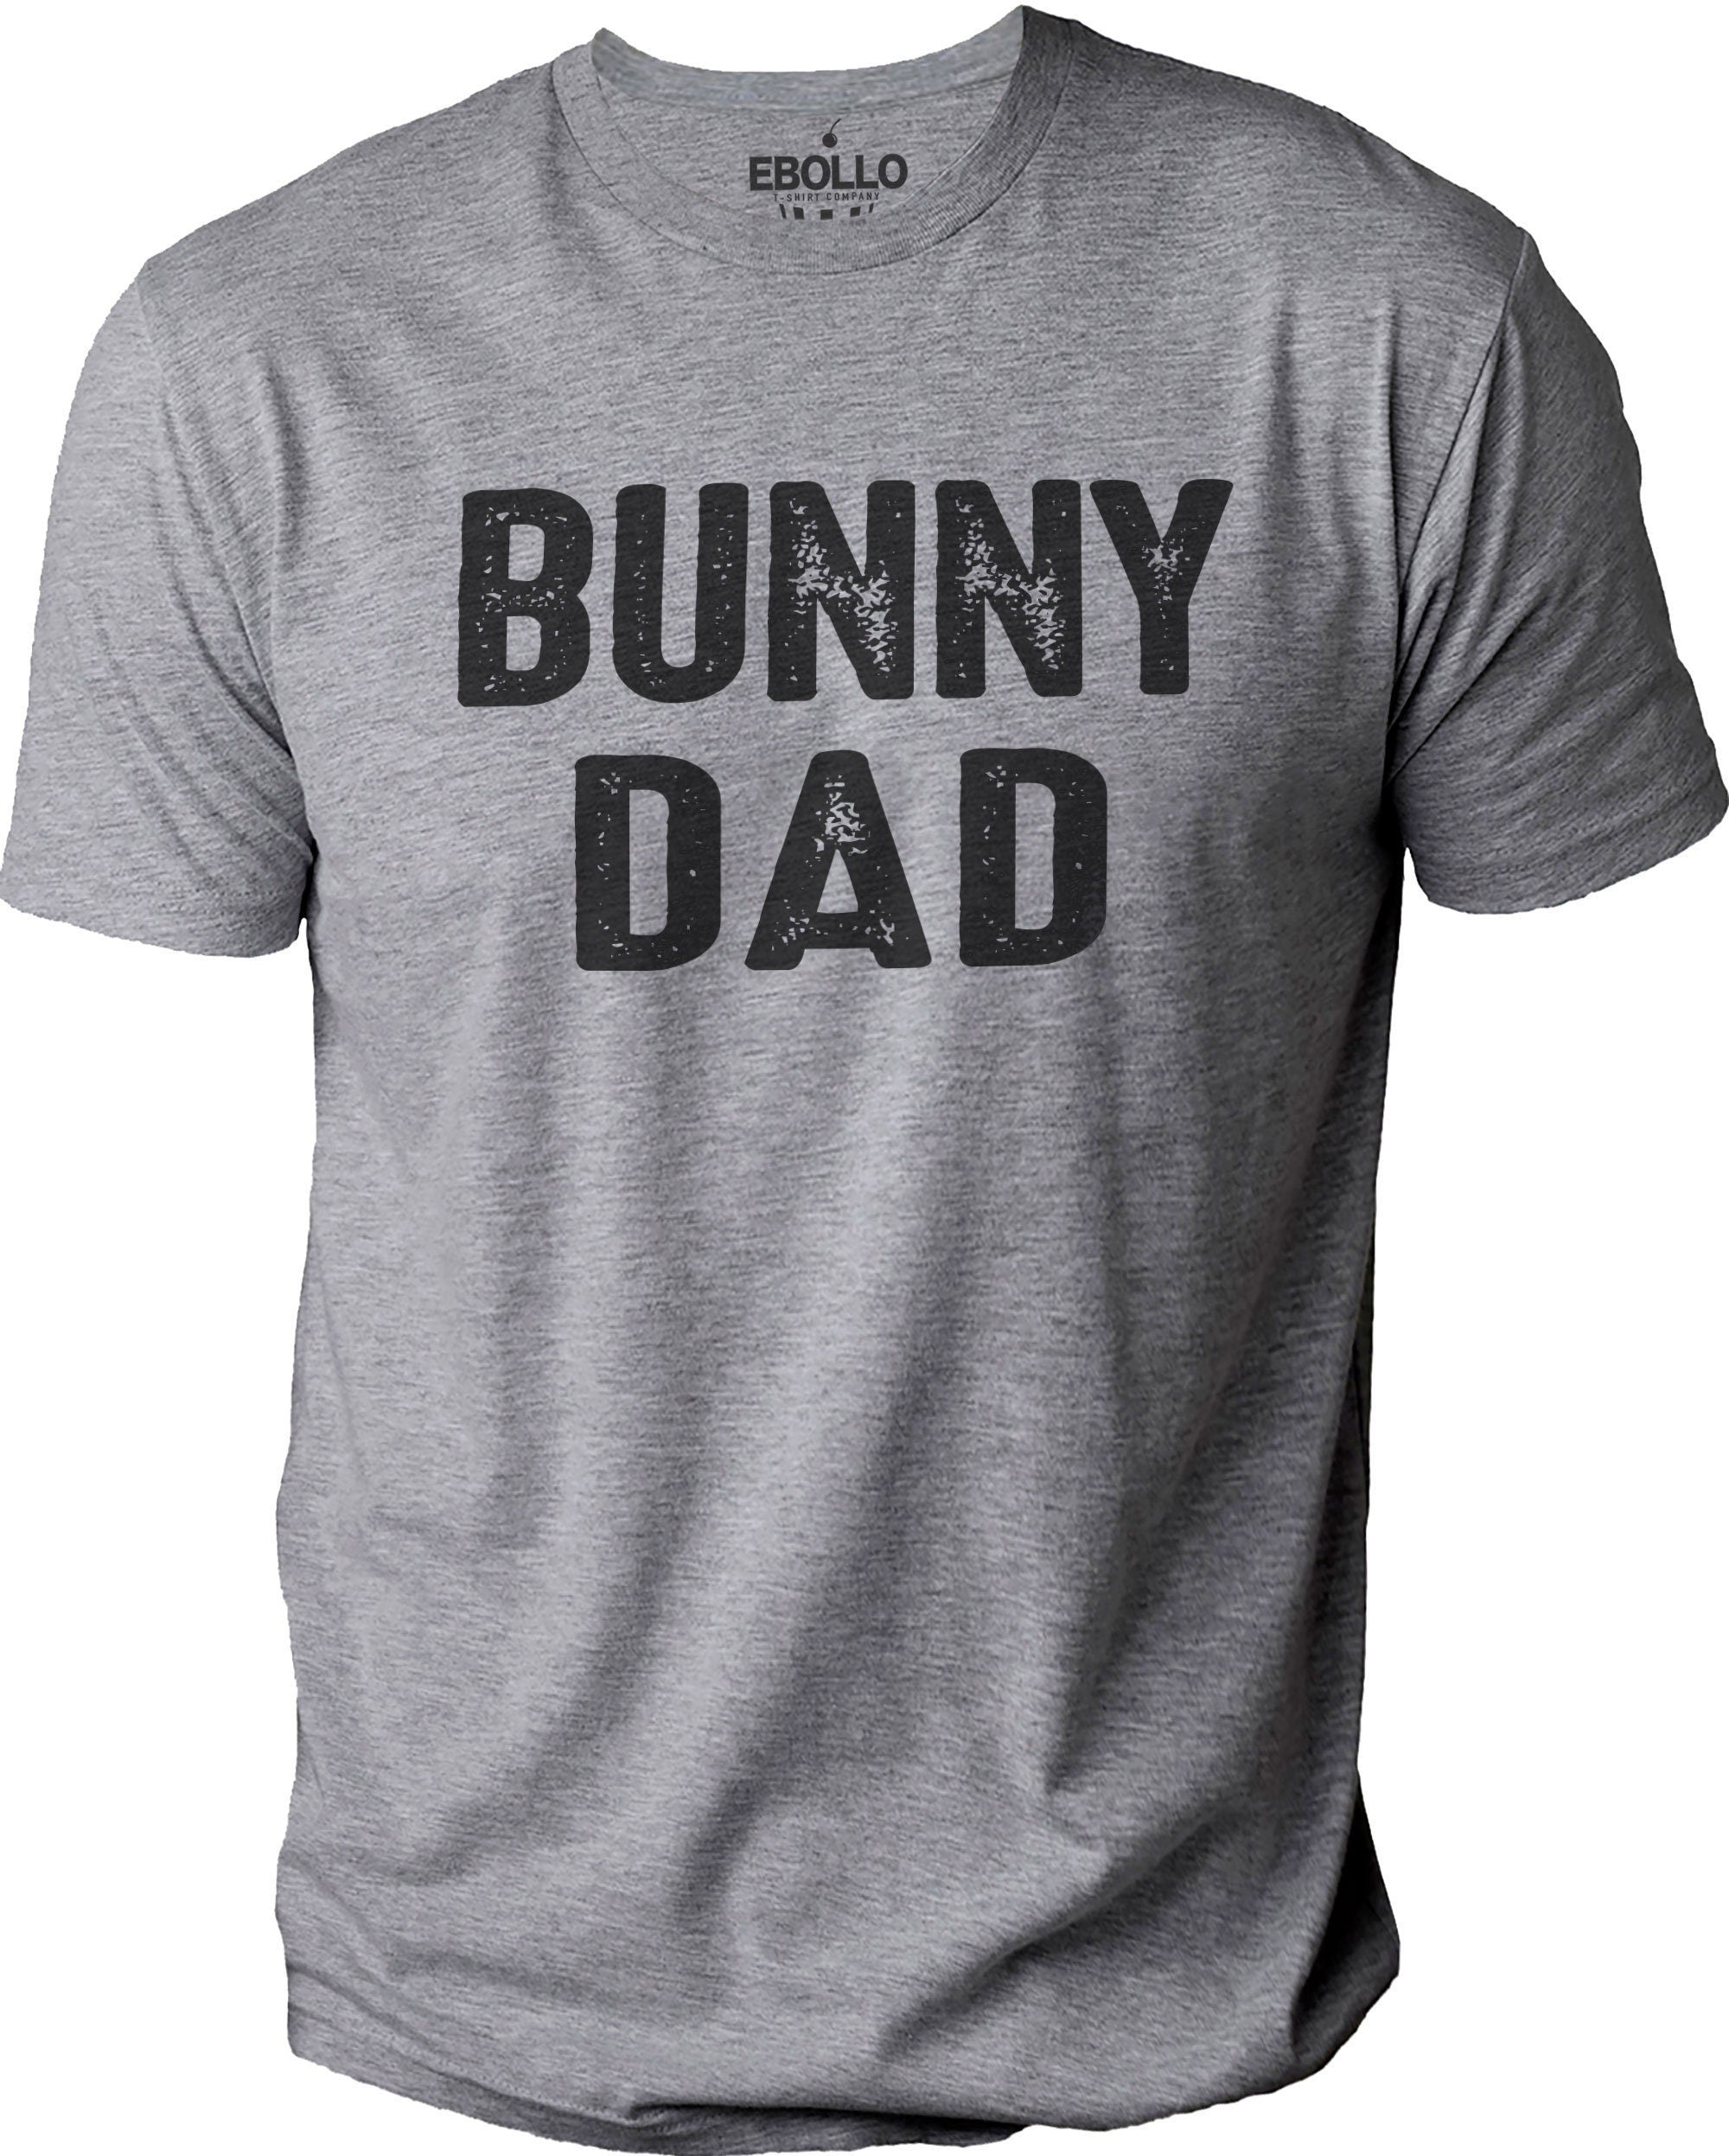 BUNNY DAD, Funny Shirt for Men - Fathers Day Gift - Dad Shirt - Funny  Easter Shirt - Daddy Gift - Dad Gift - Humorous Tee Bunny TShirt